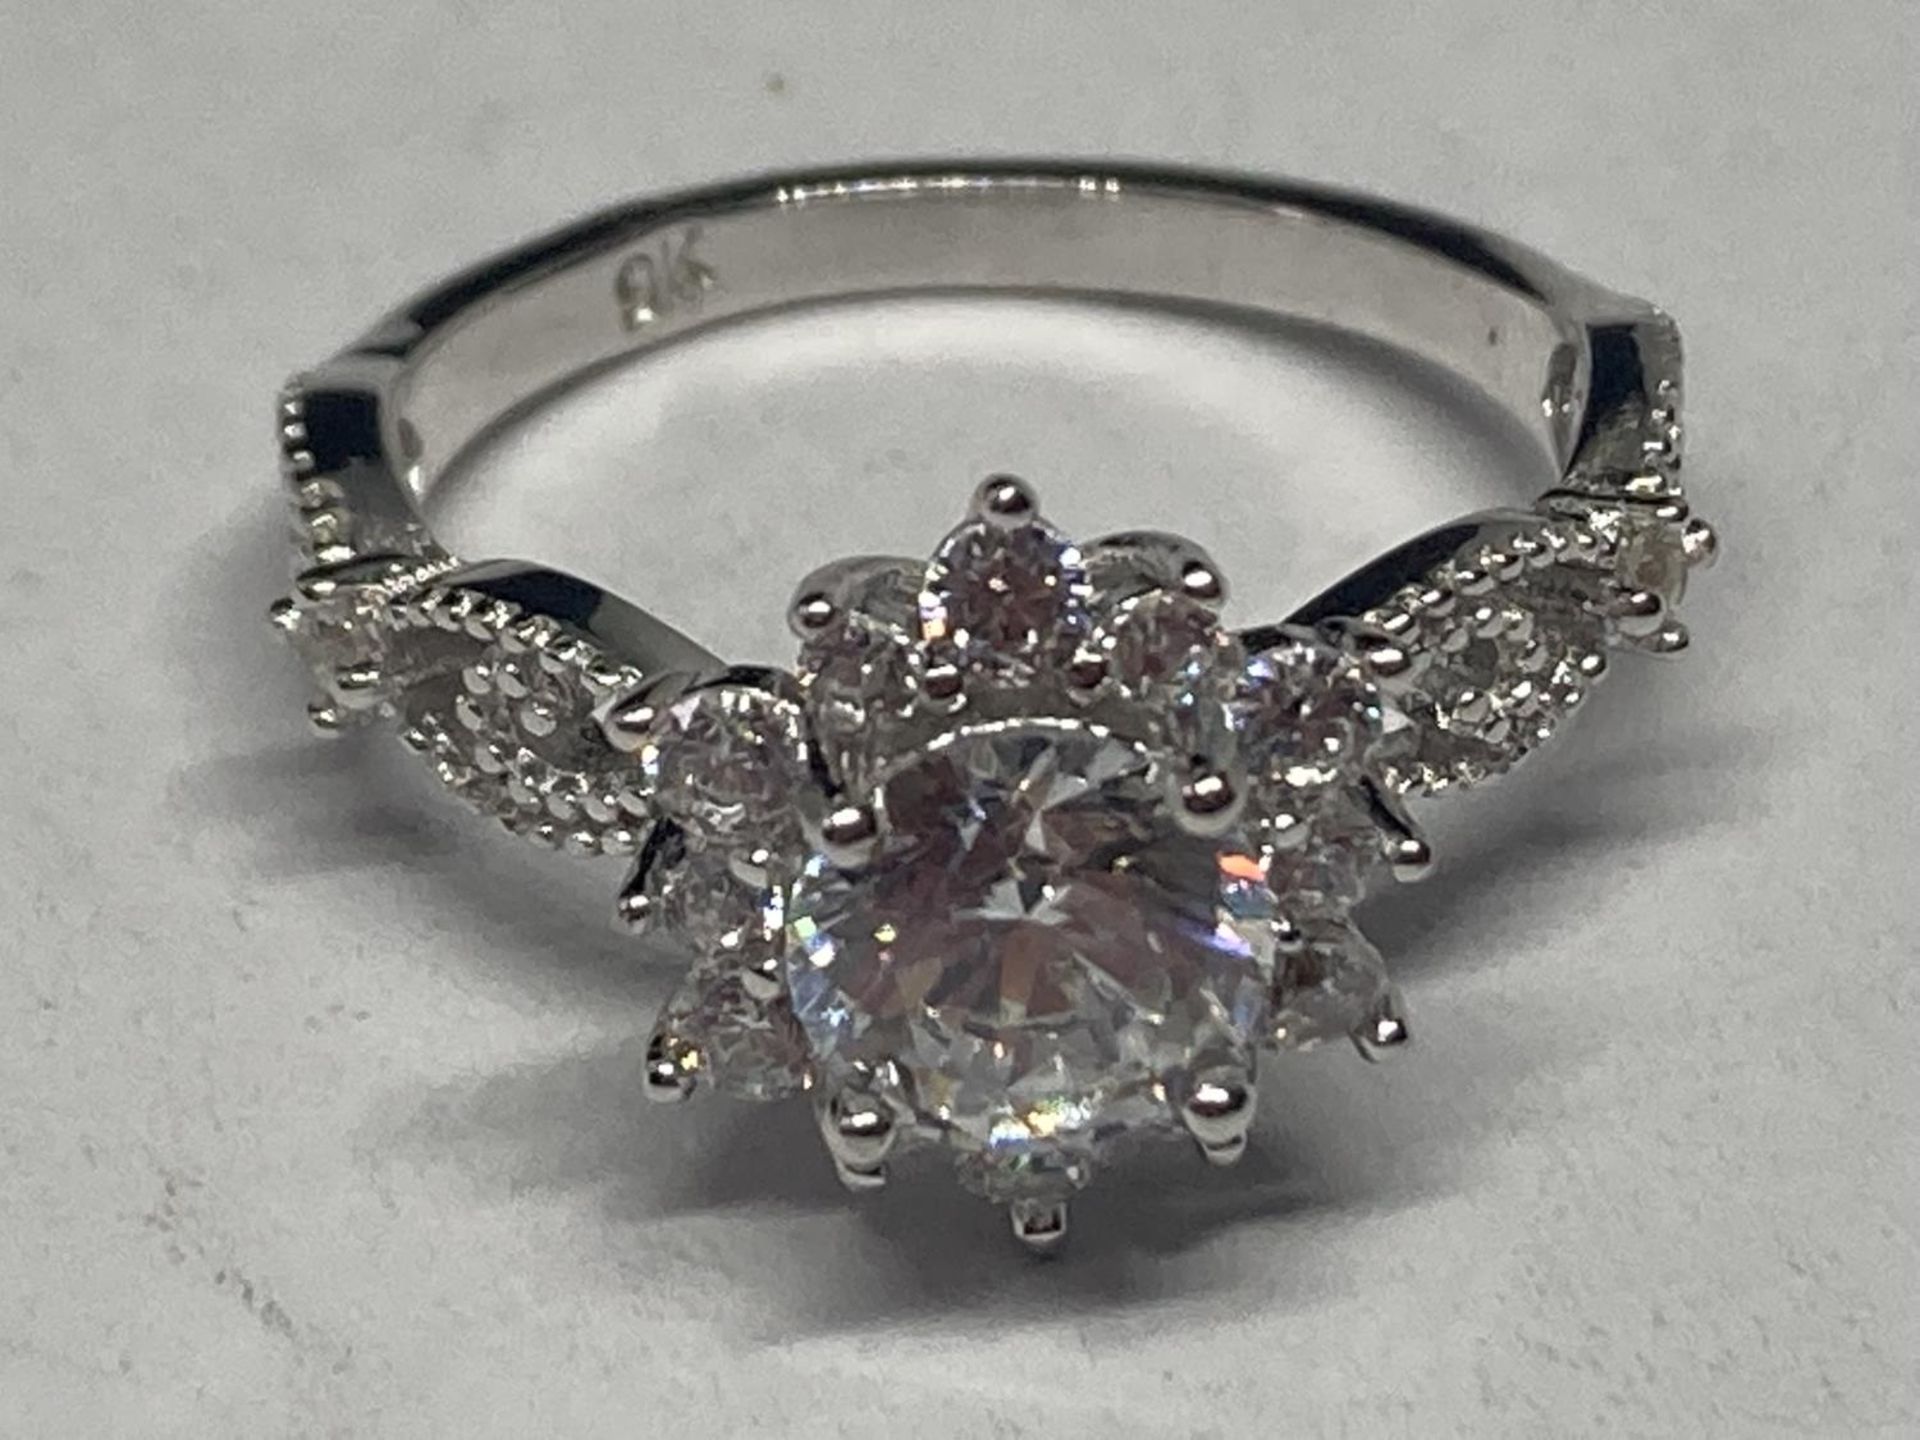 A MARKED 9K RING WITH 1 CARAT OF MOISSANITE SIZE N GROSS WEIGHT 3.05 GRAMS